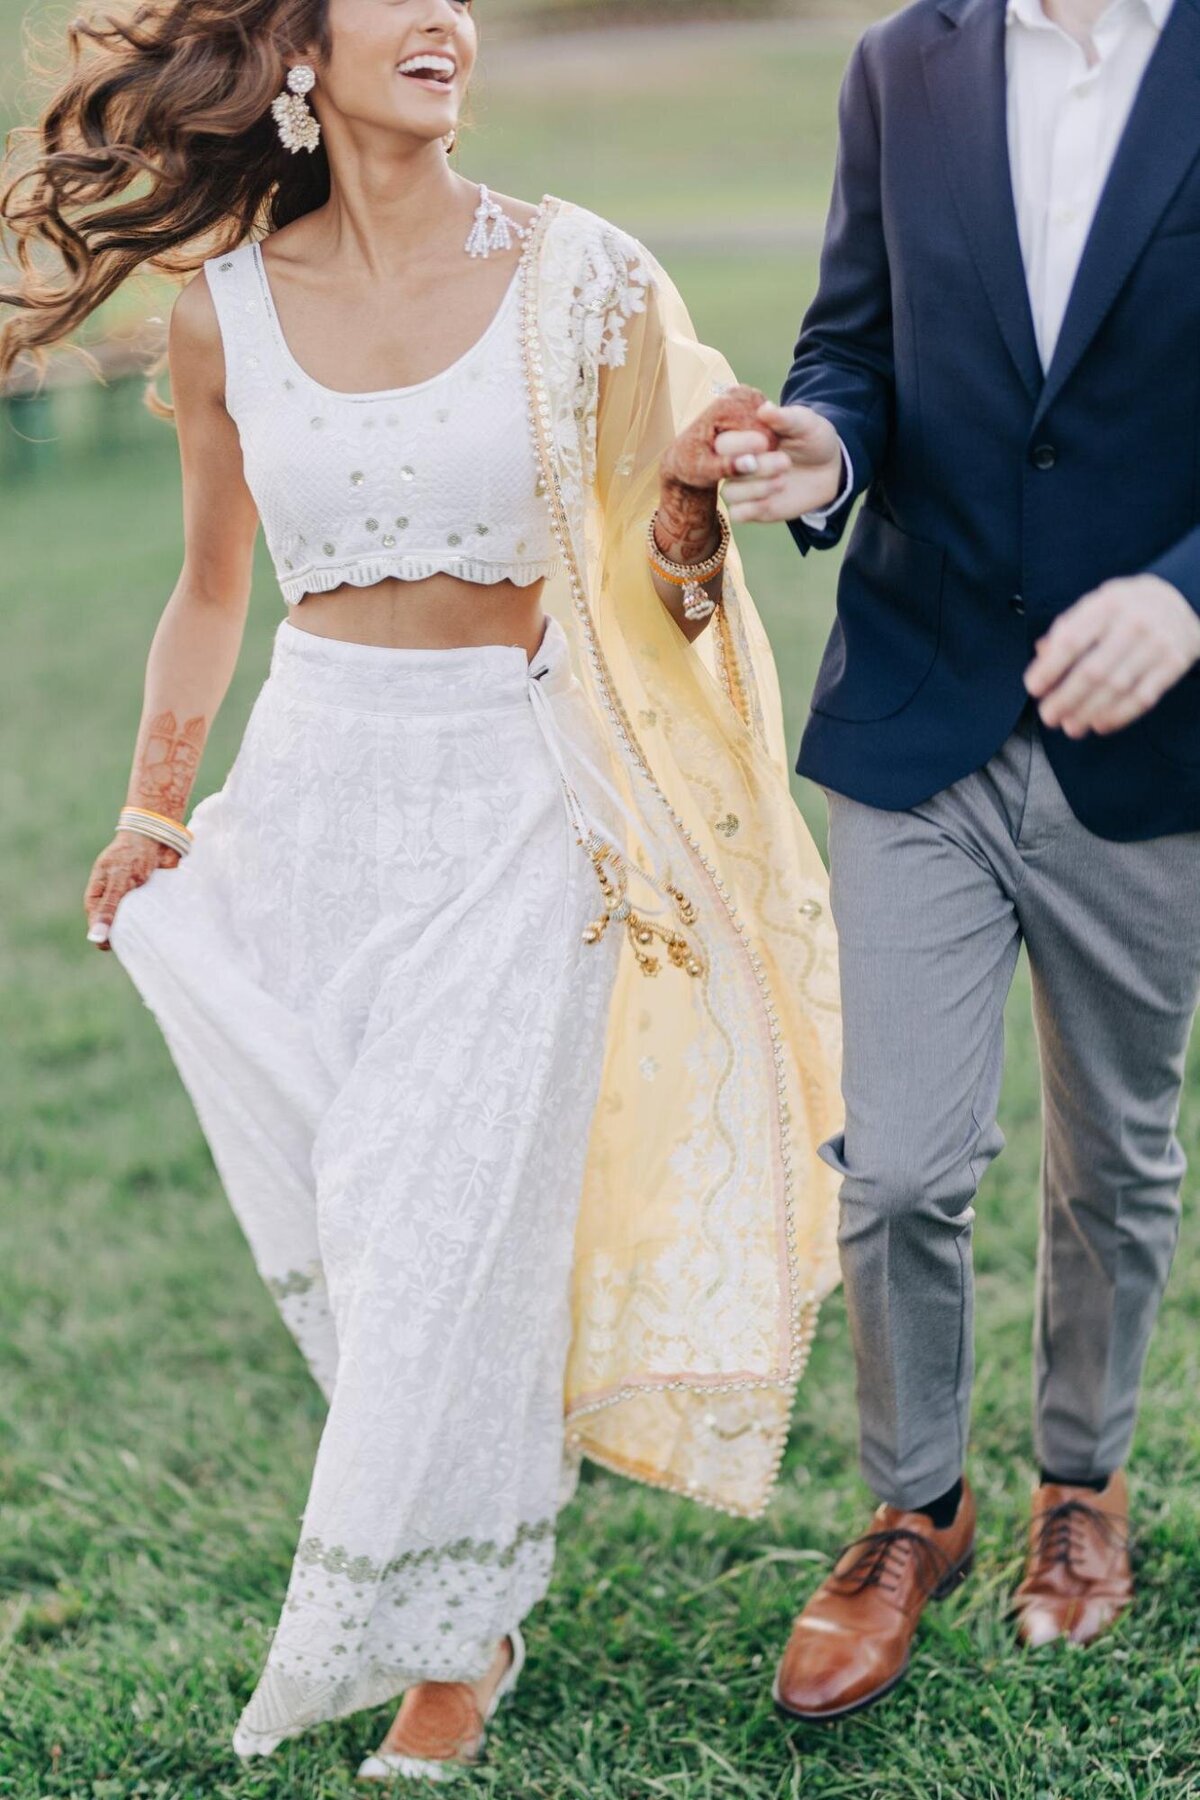 A joyful woman in a white and gold traditional outfit holding hands with a man in a suit, both walking on grass.